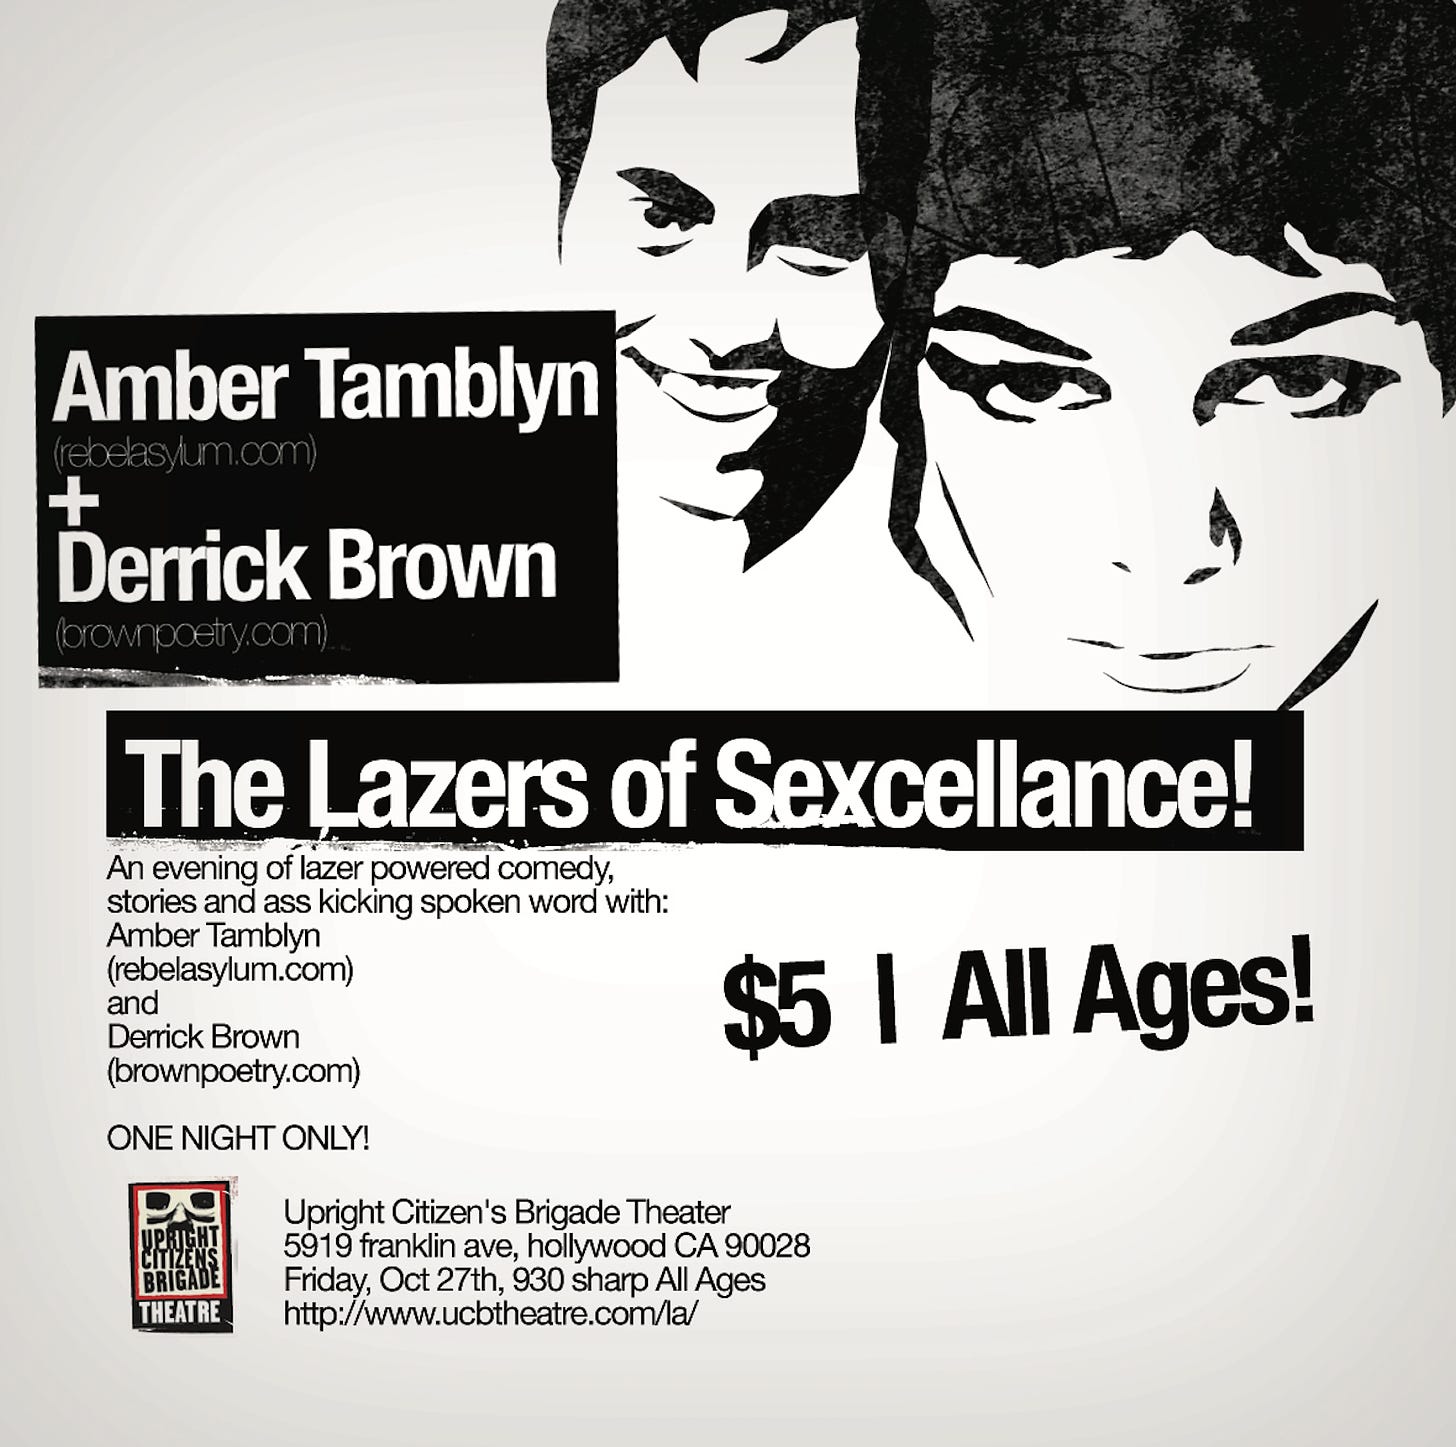 A poster advertising a show. Text on the poster reads "Amber Tamblyn + Derrick Brown. The Lazers of Sexcellence! An evening of lazer powered comedy, stories and ass kicking spoken word with Amber Tamblyn (rebelasylum.com) and Derrick Brown (brownpoetry.com). One night only. $5 All ages. Upright Citizen's Brigade Theater. 5919 franklin ave, hollywood CA 90028. Friday, Oct 27 9:30 sharp. www.ucbtheatre.com/la.